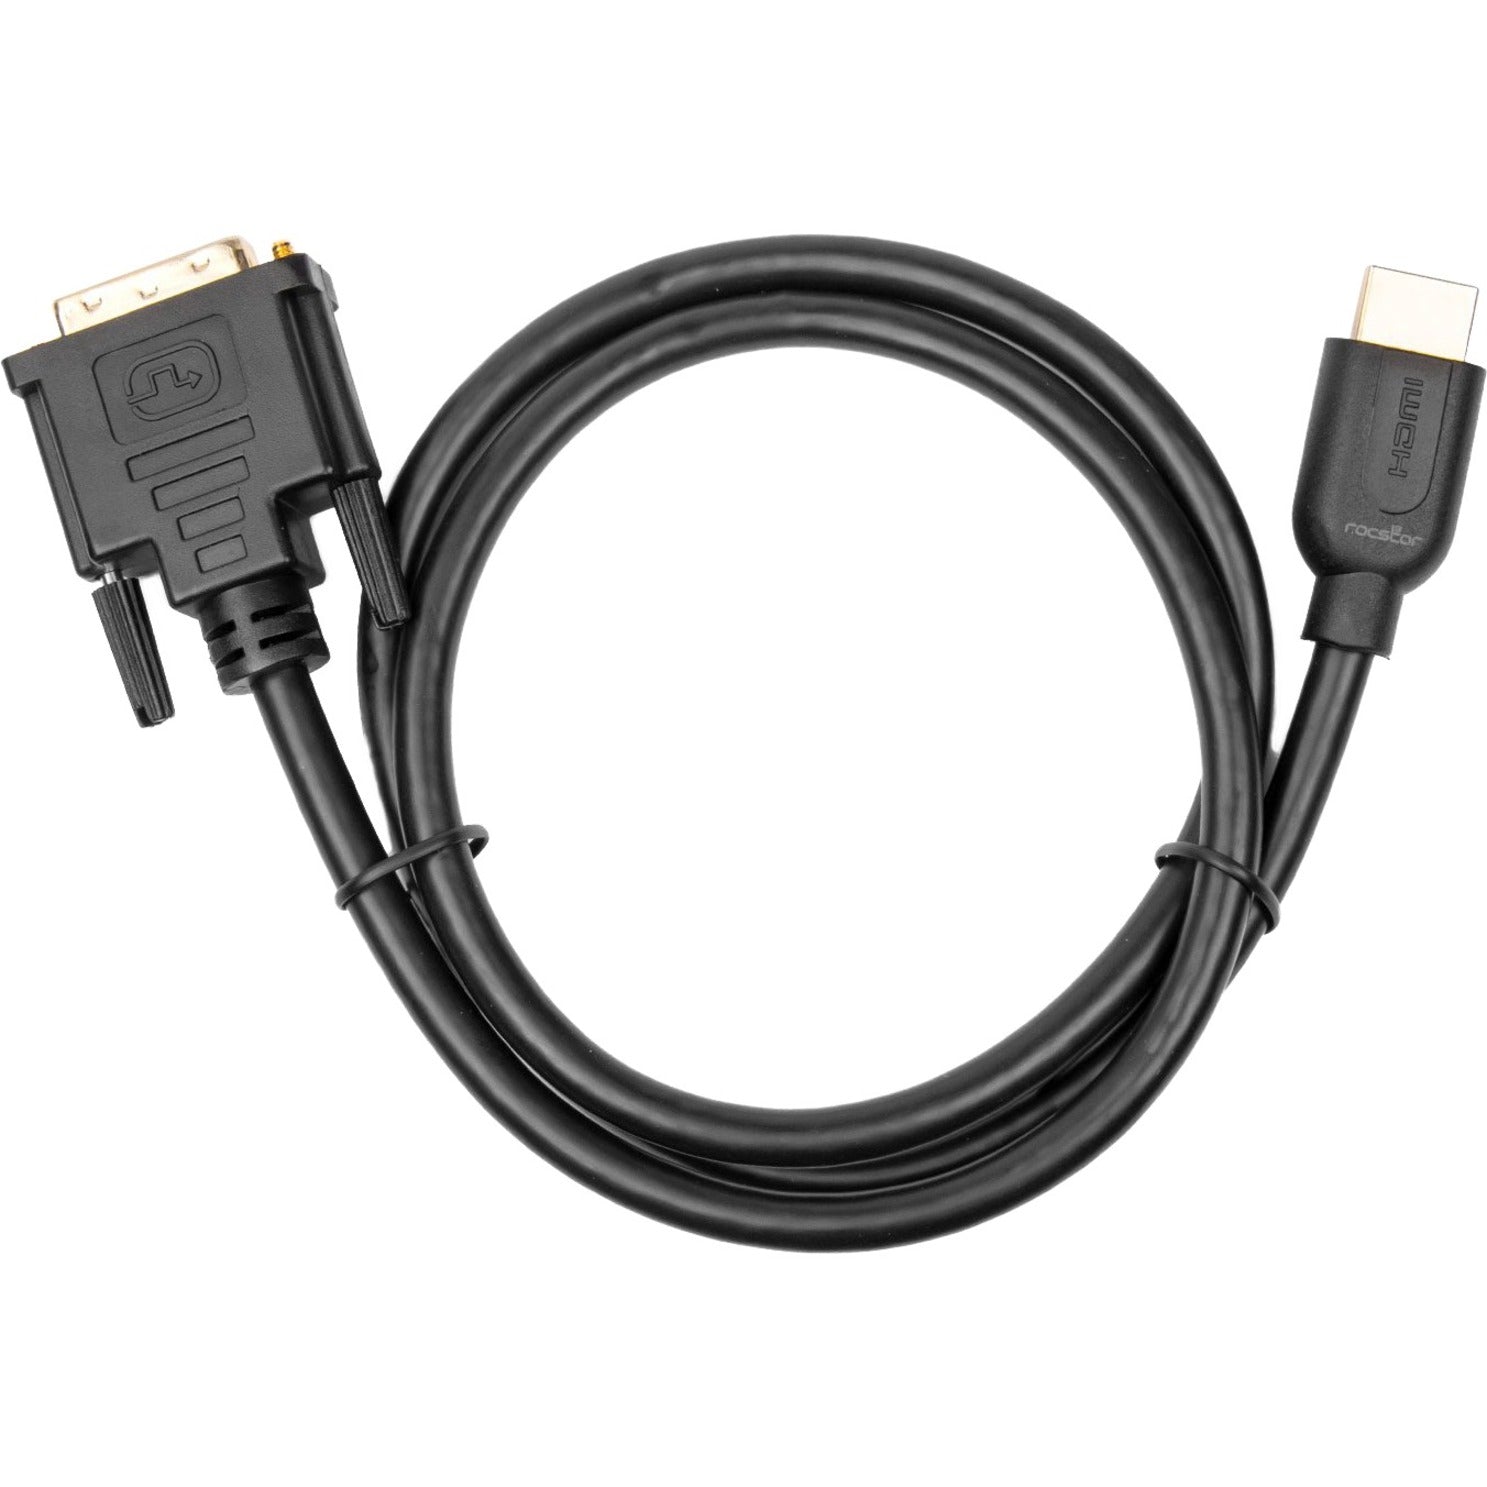 Rocstor Y10C266-B1 Premium HDMI to DVI-D Cable Male to Male, 3 ft, Gold-Plated, 1920 x 1200 Supported Resolution